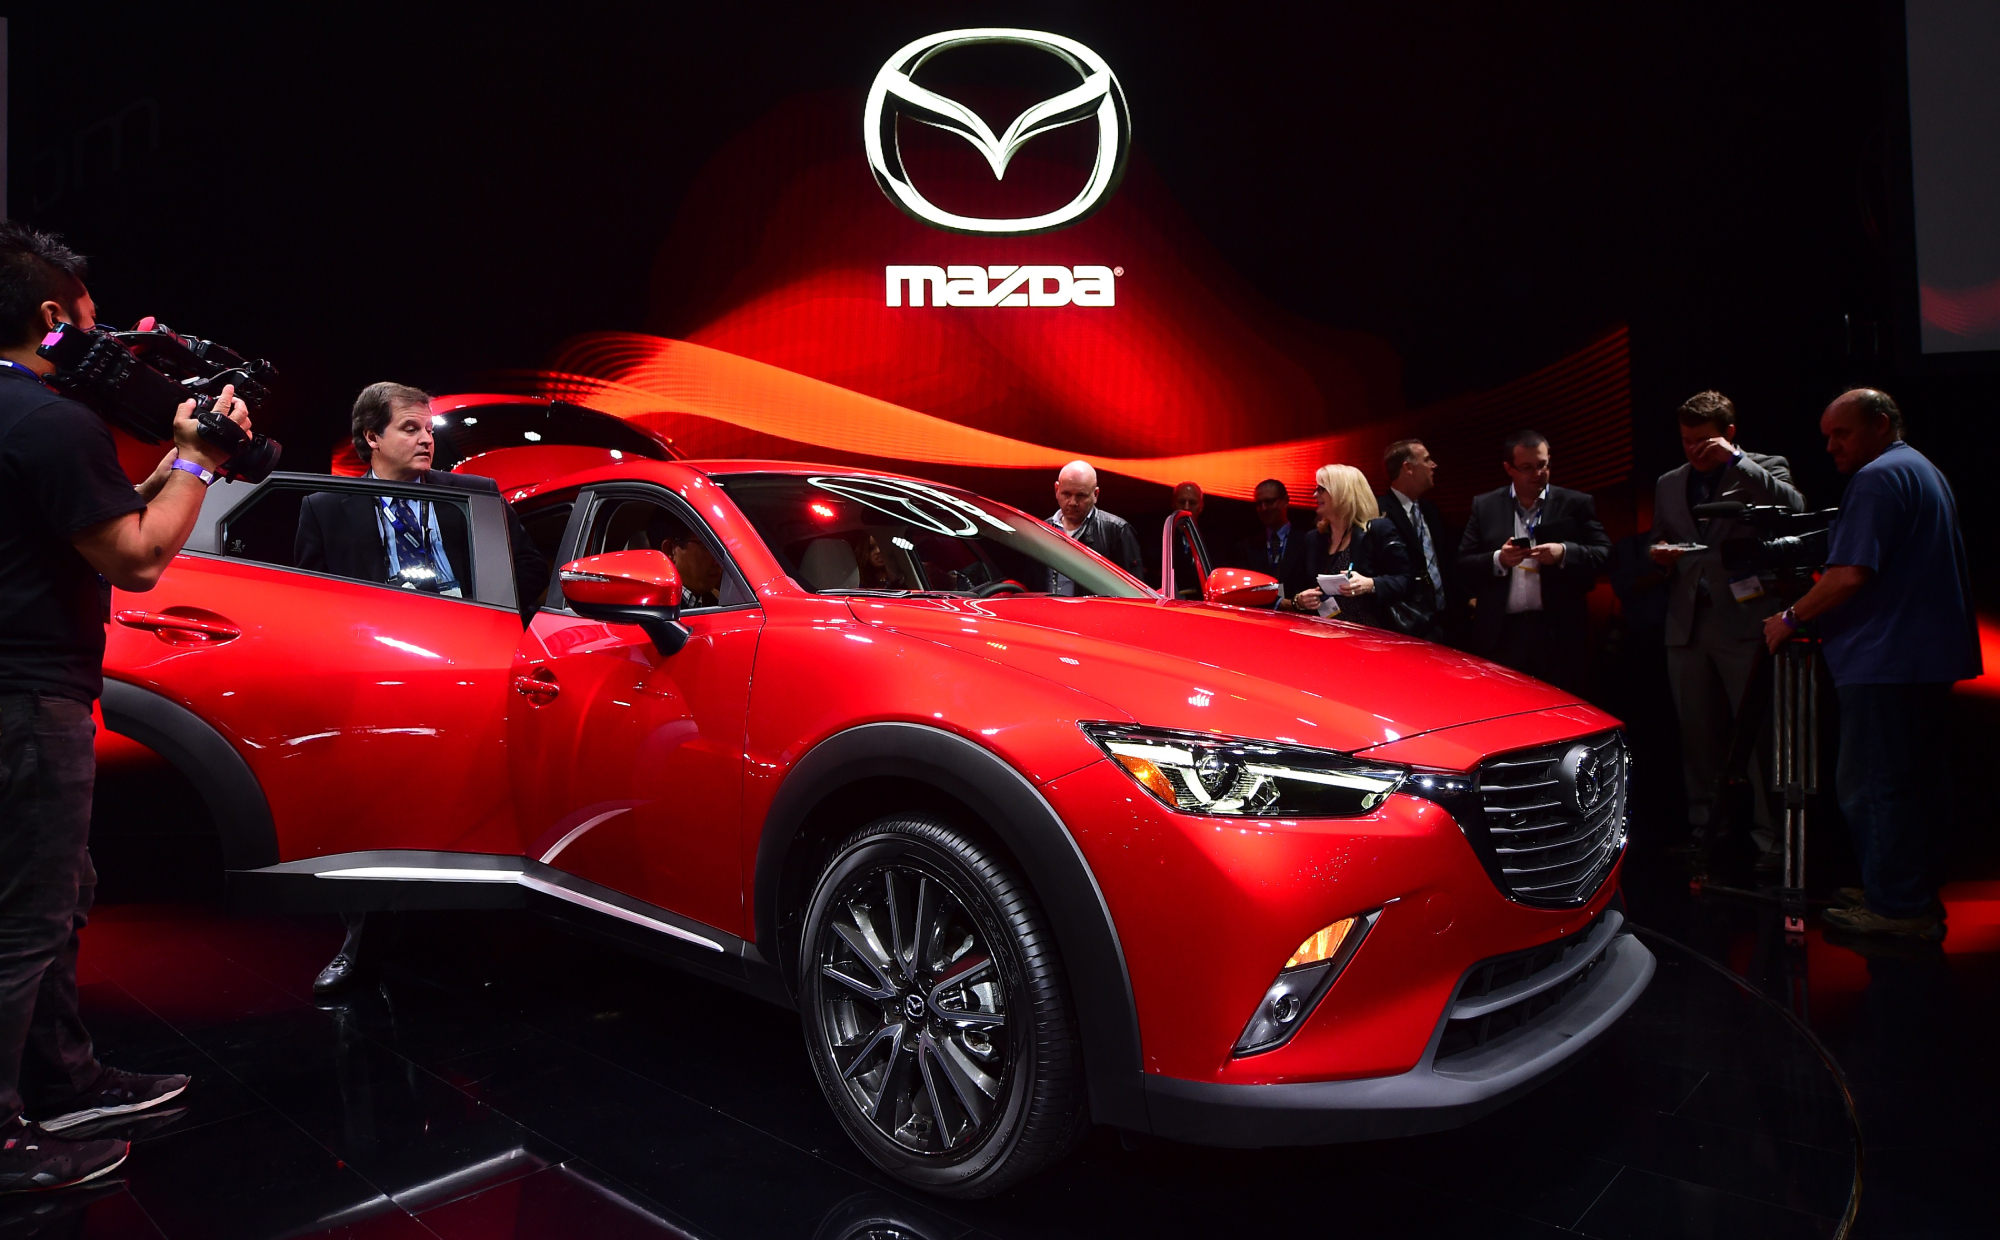 Consumer Reports says the 2016 Mazda CX-3 has air conditioning issues